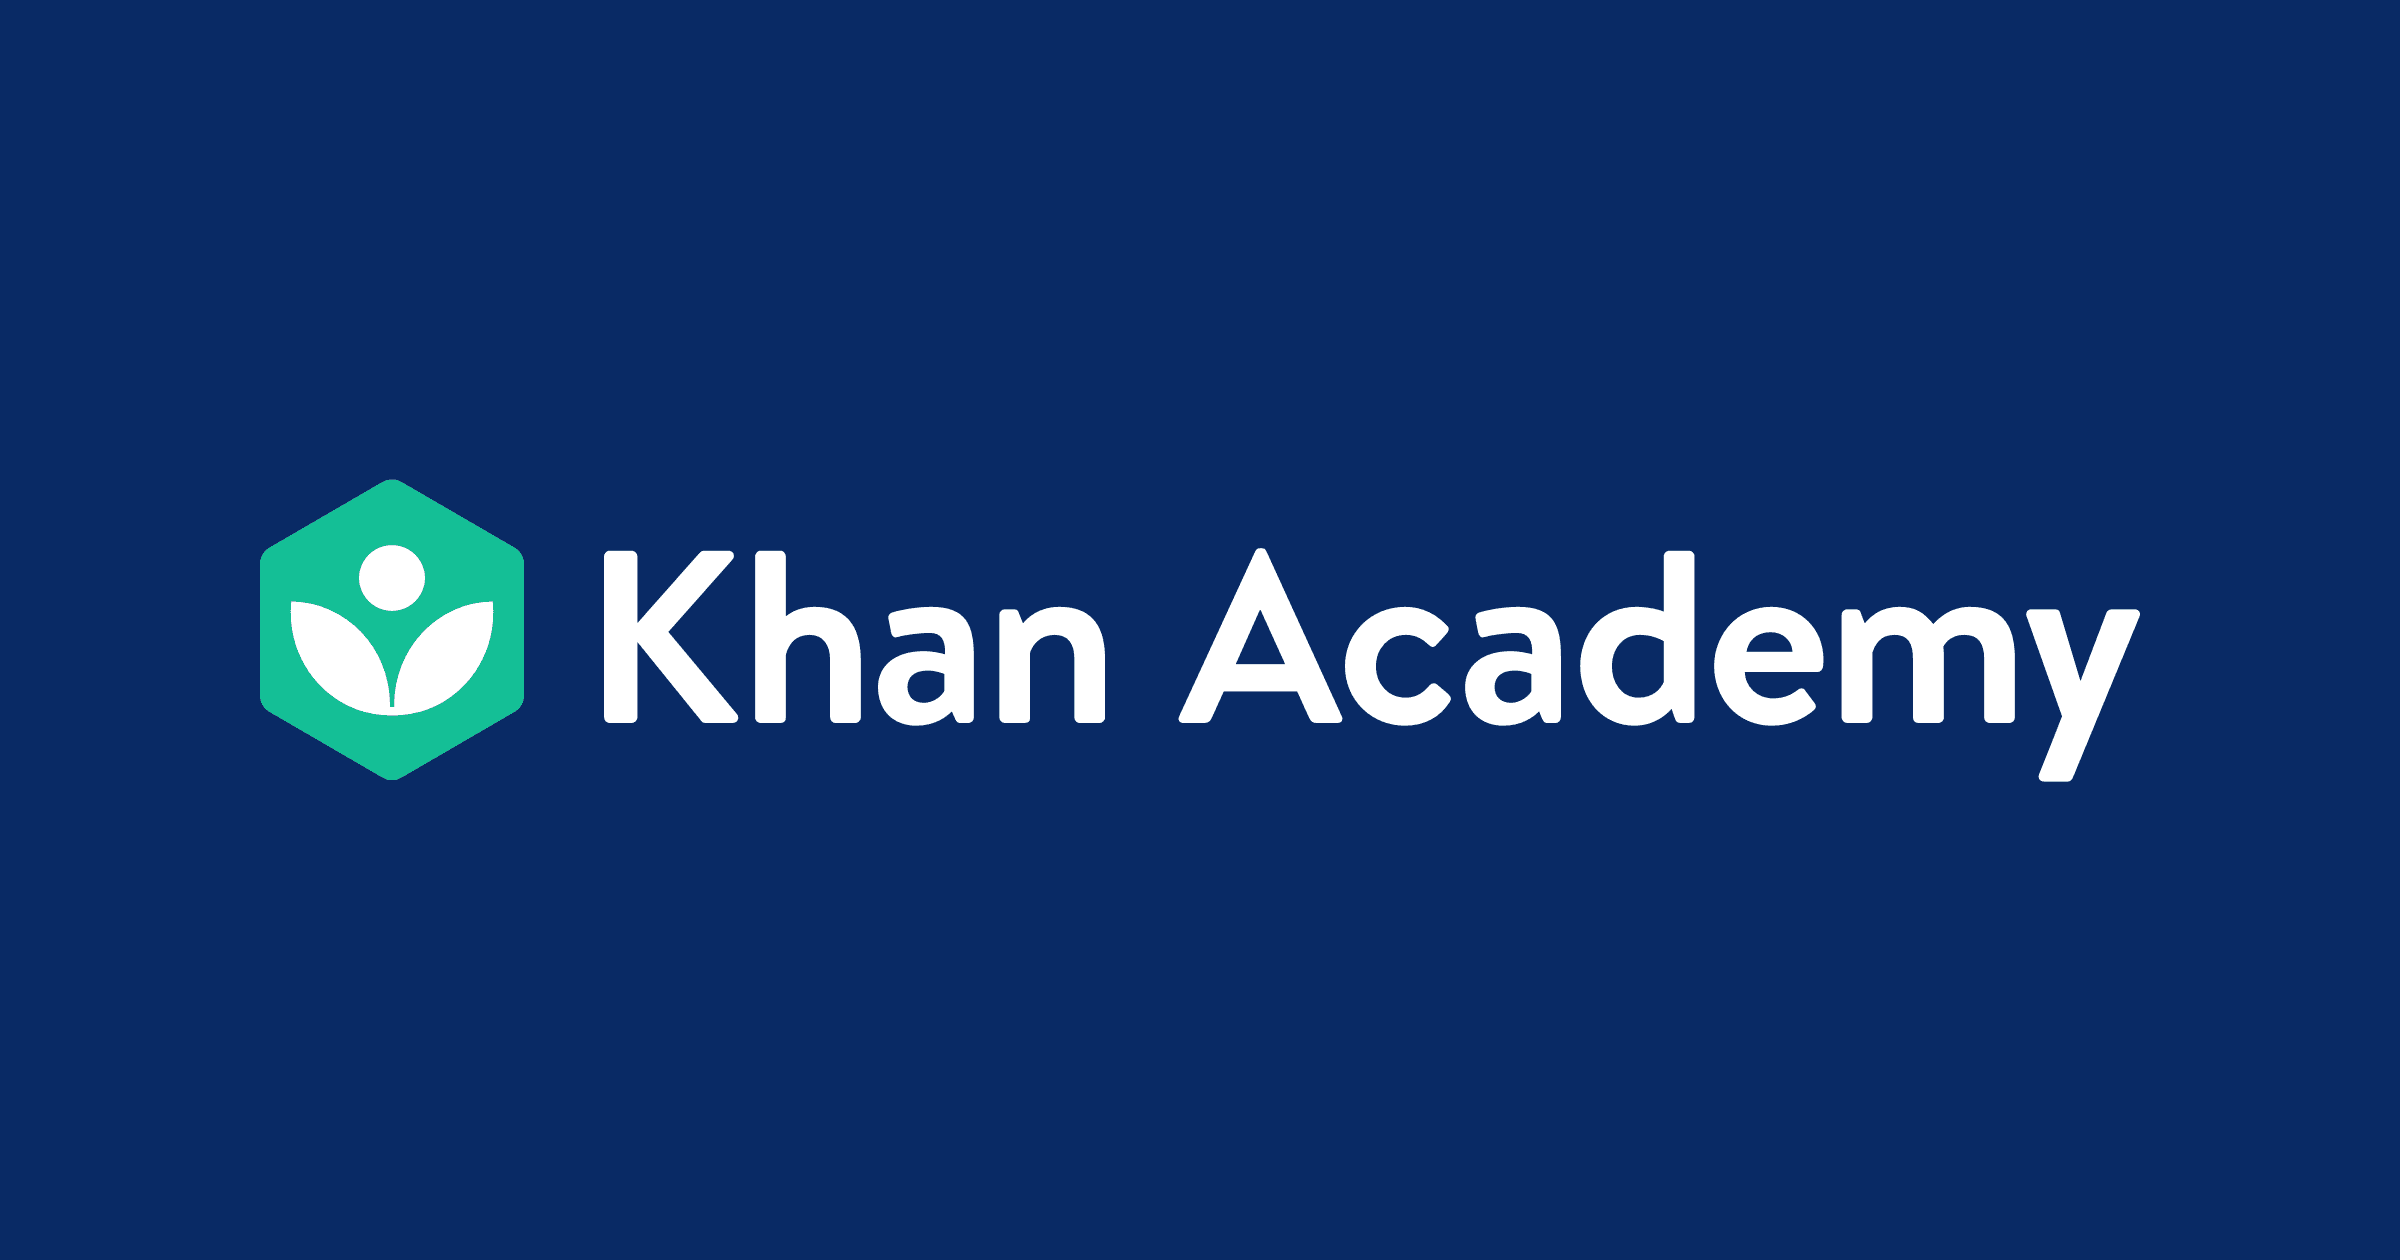 Khan Academy free app for students